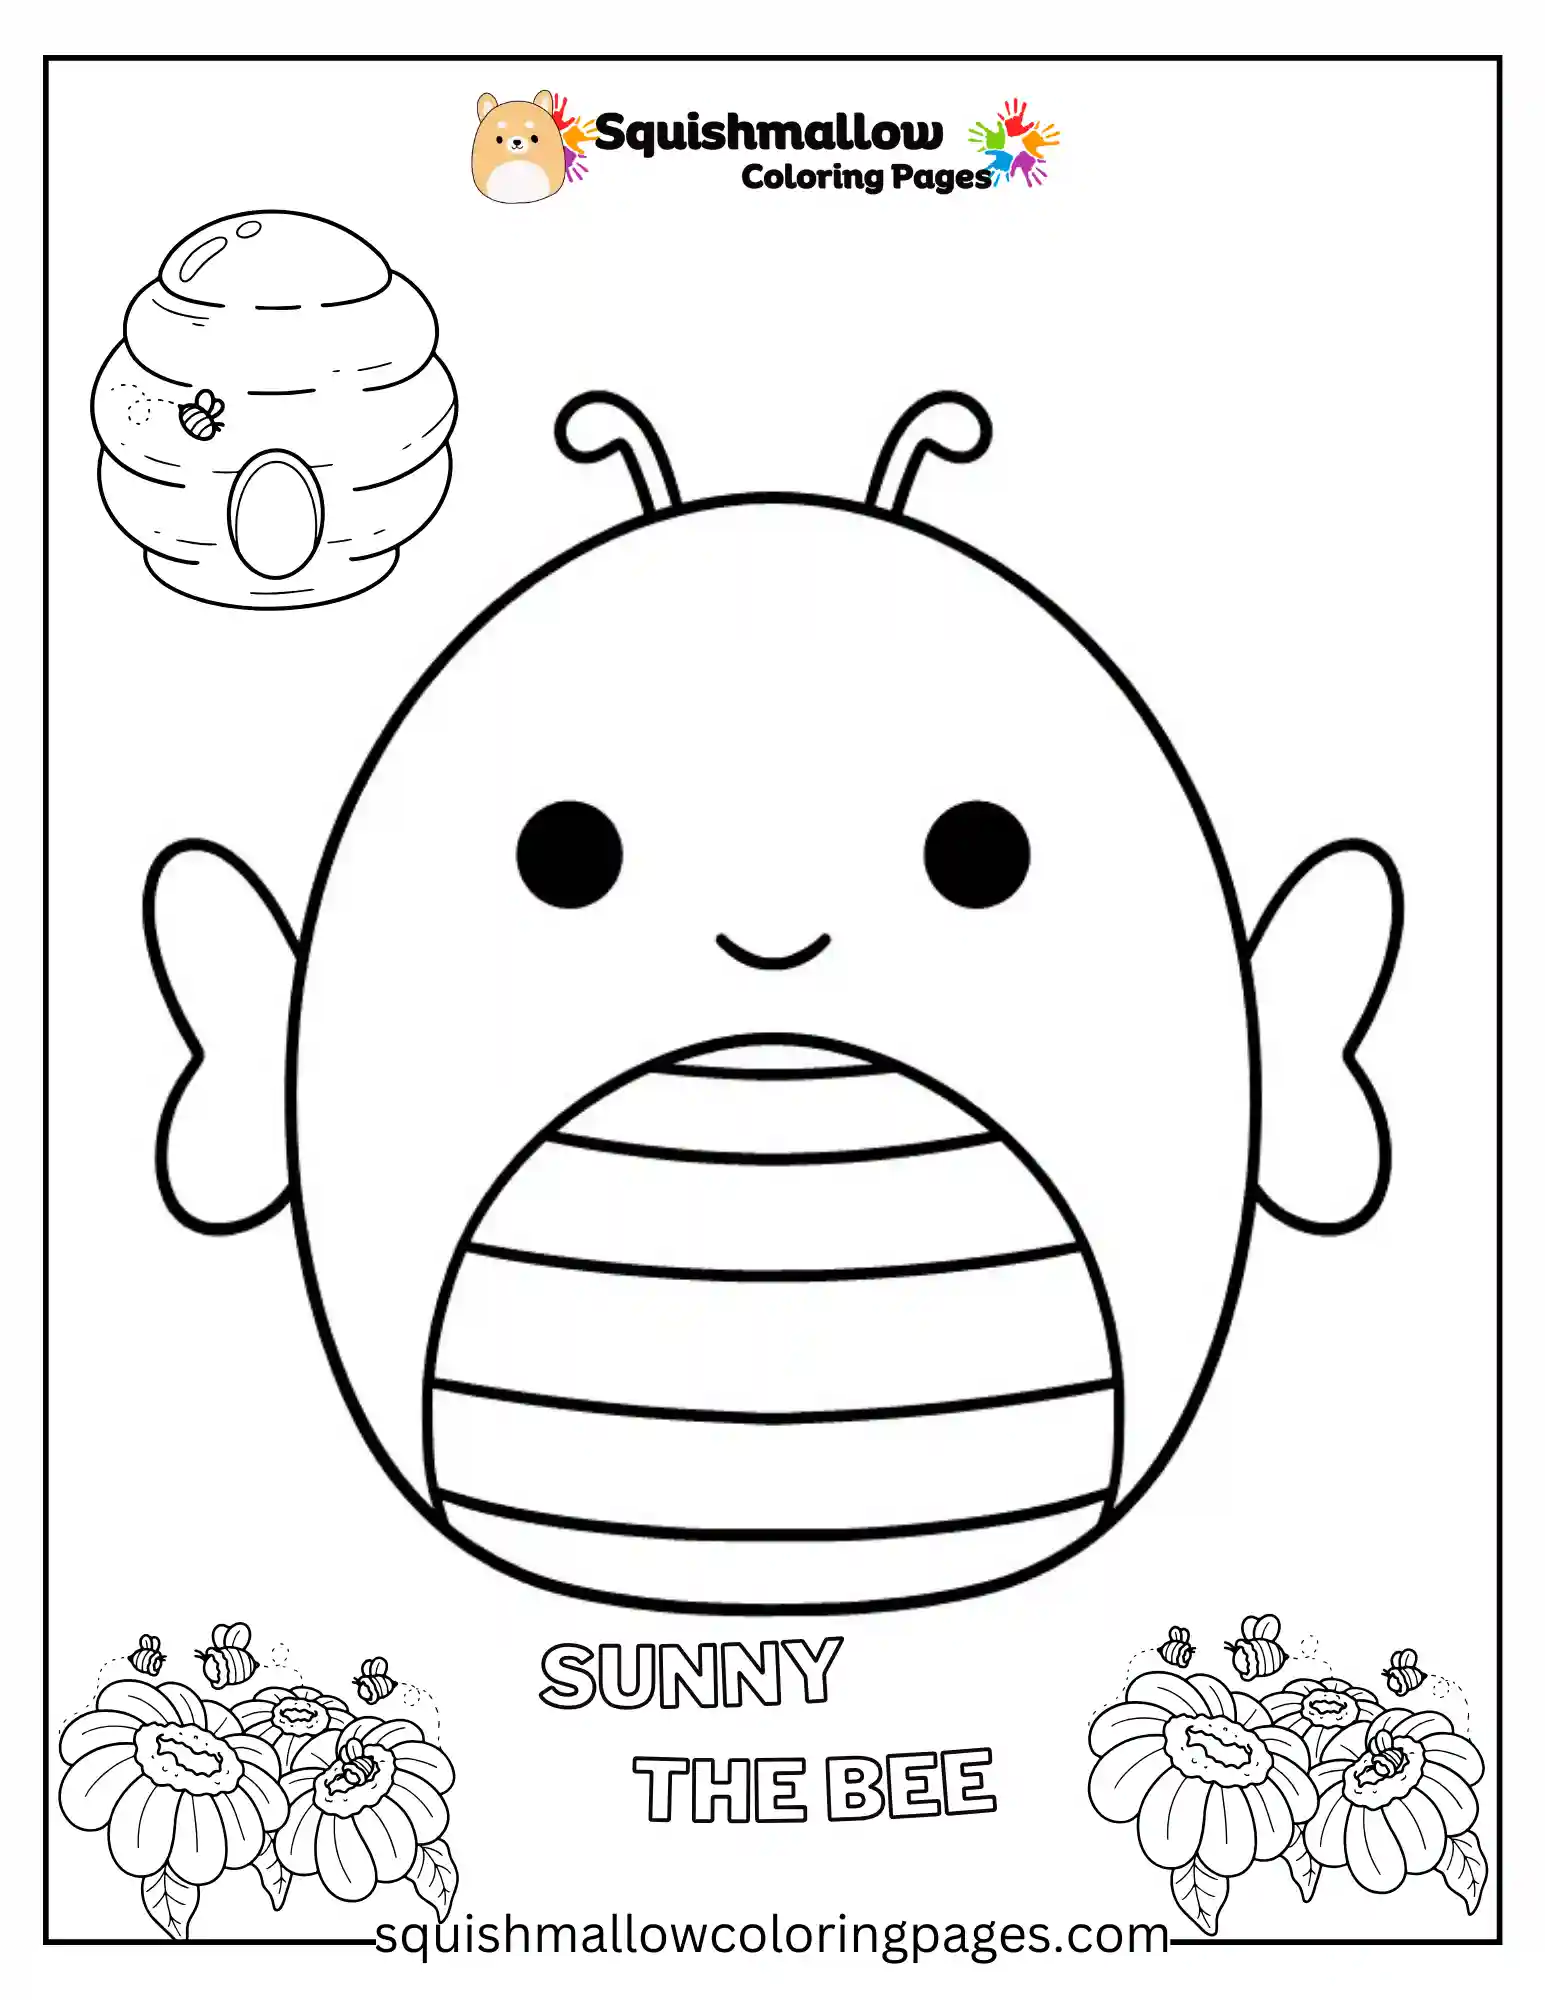 Sunny The Bee Squishmallow Coloring Pages